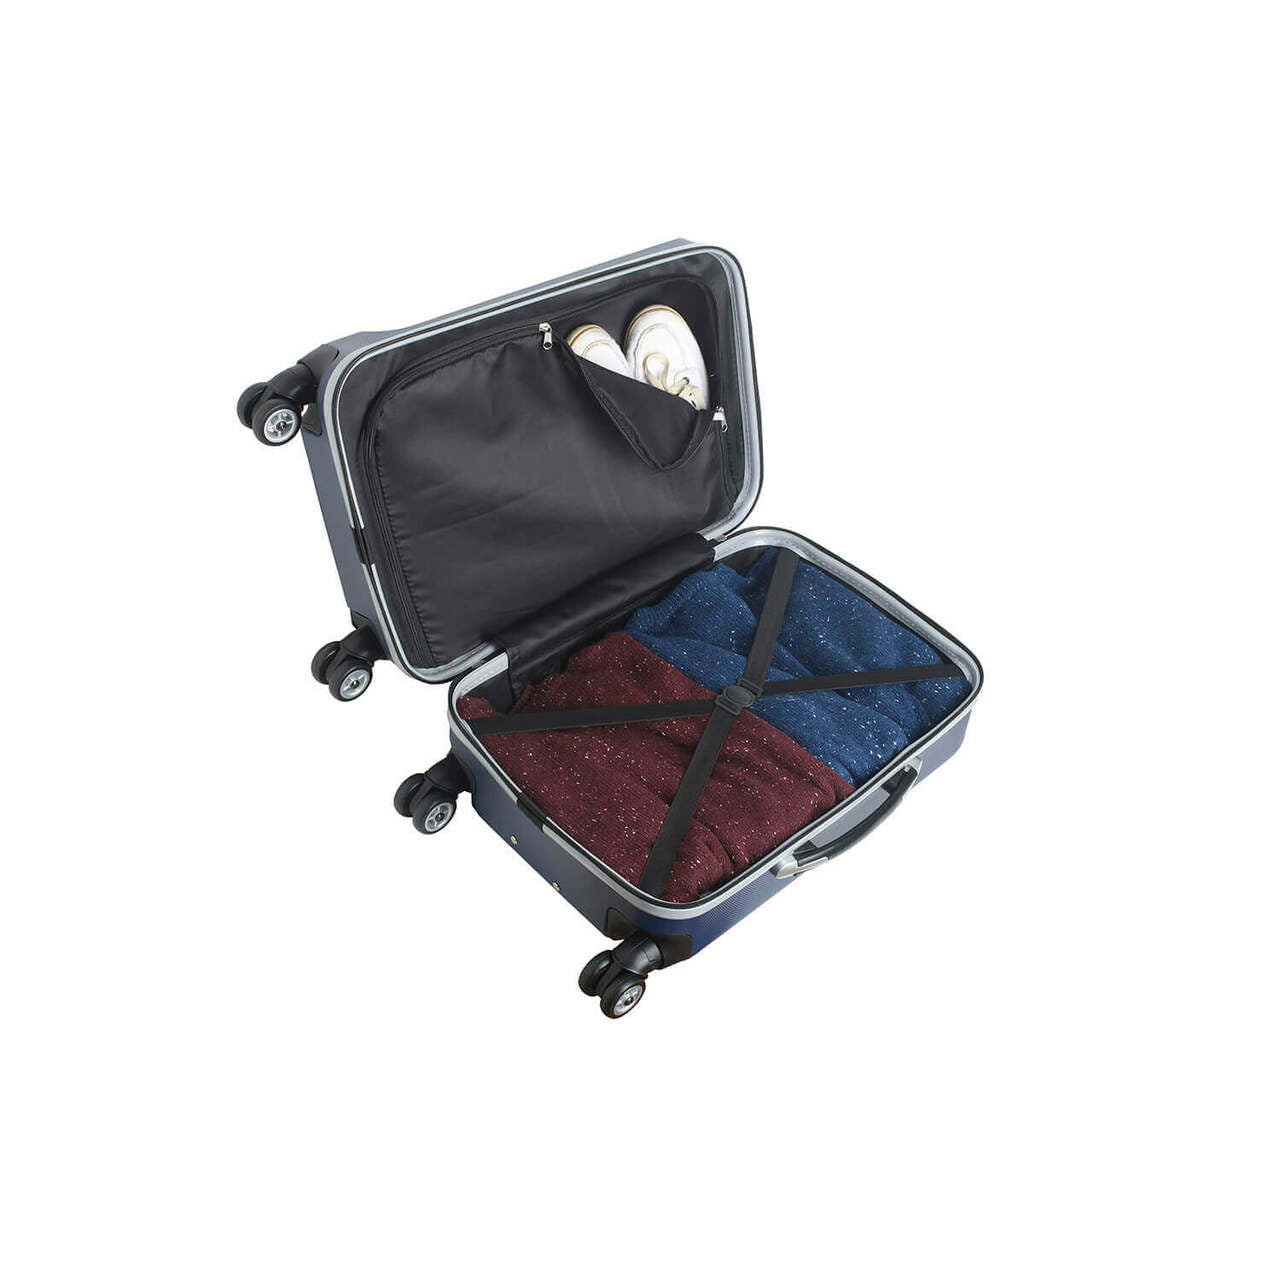 South Florida Bulls 20" Navy Domestic Carry-on Spinner